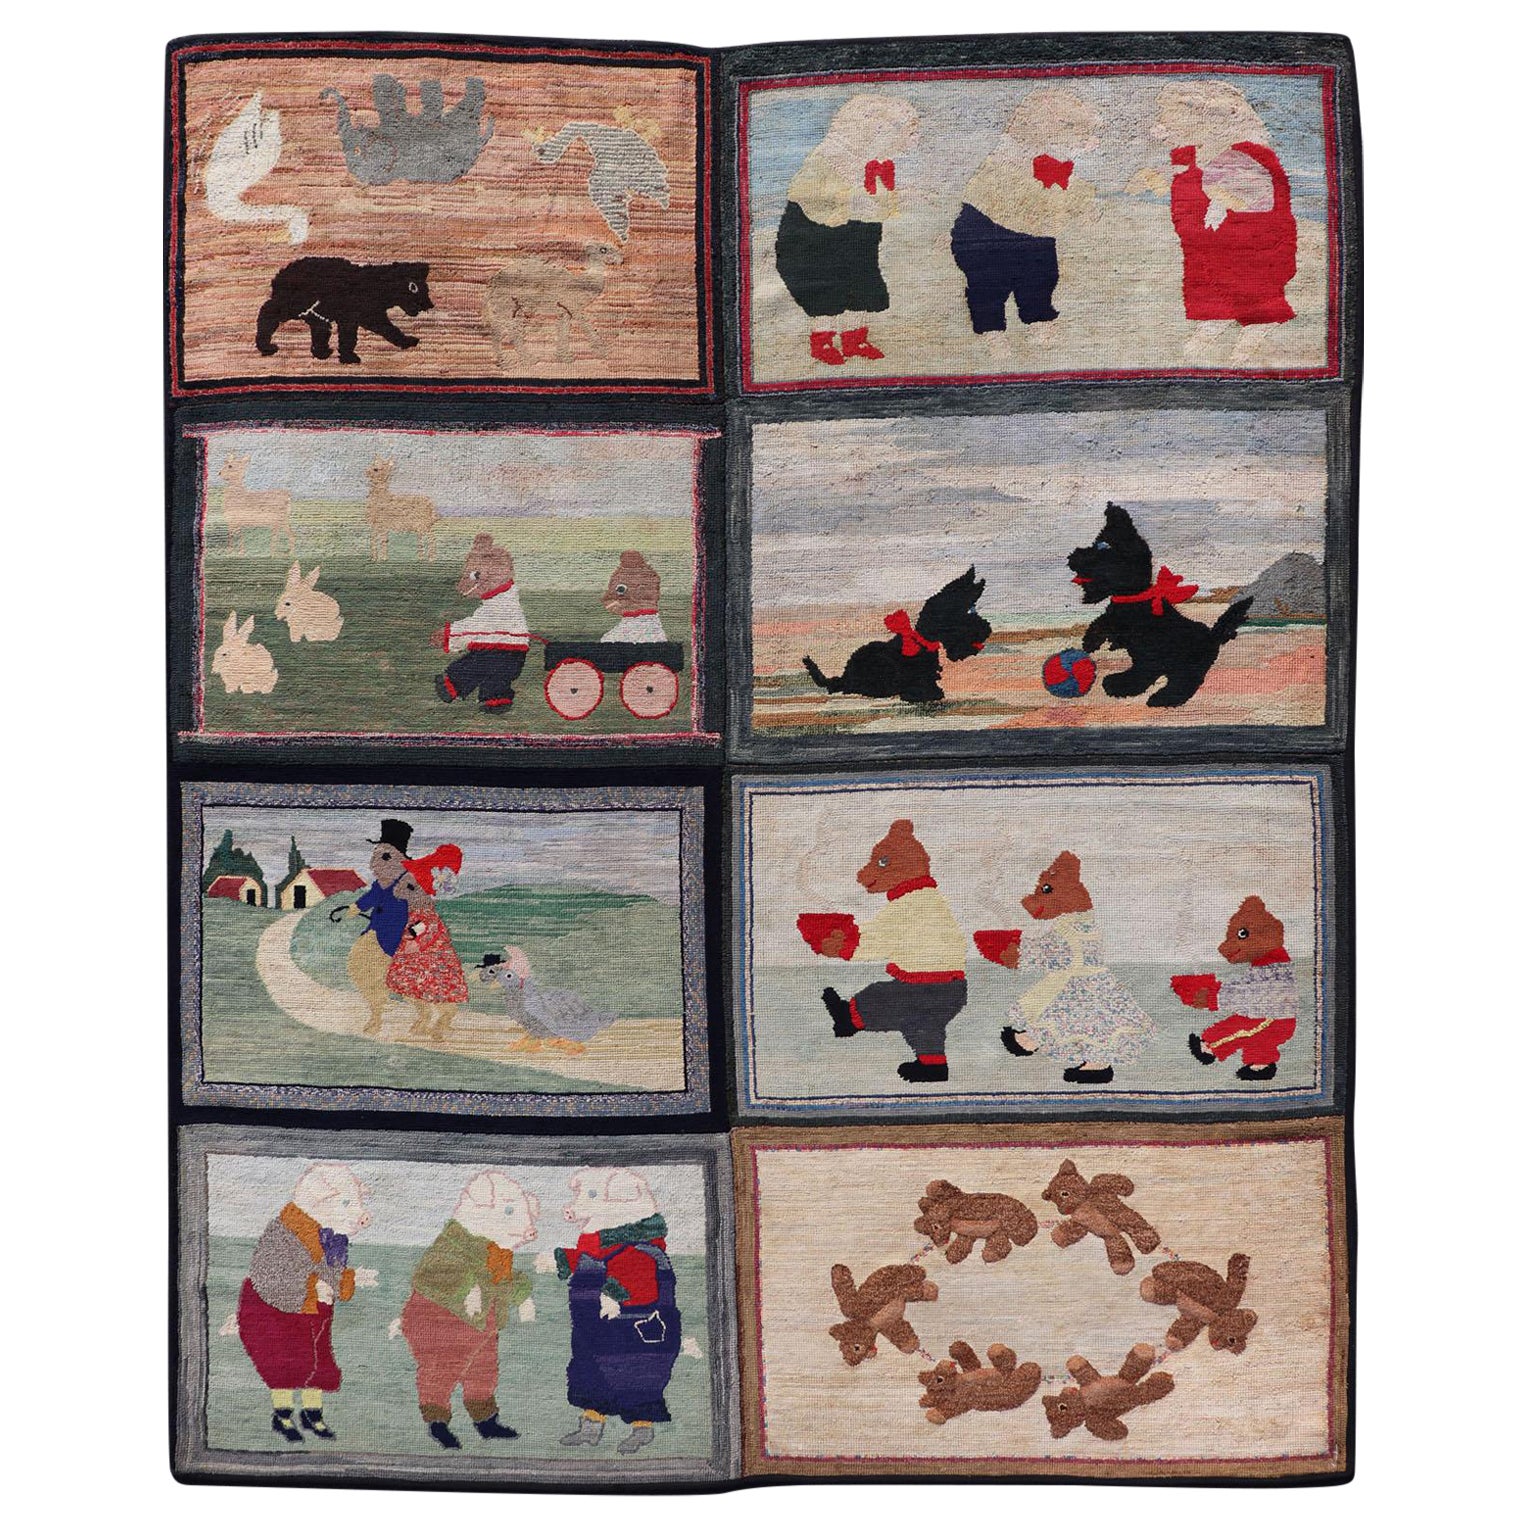 Antique American Hooked Rug with Panel of Children's Rhymes